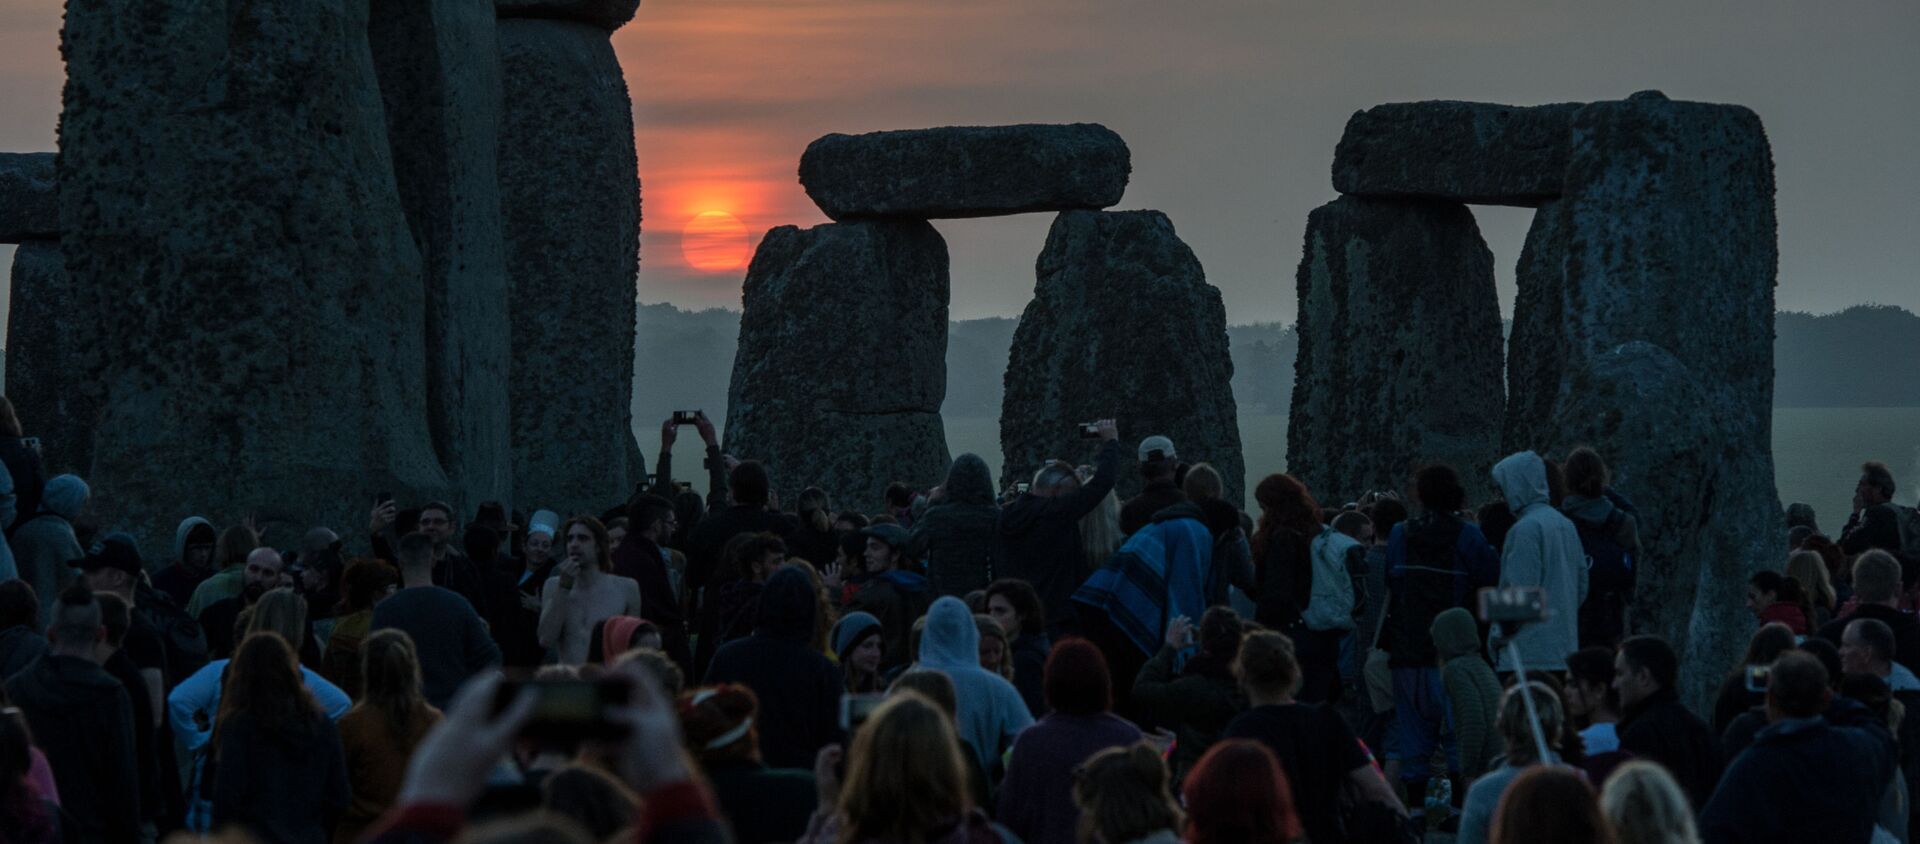 Revellers watch the sunrise as they celebrate the pagan festival of Summer Solstice at Stonehenge in Wiltshire, southern England on June 21, 2017 - Sputnik International, 1920, 15.03.2021